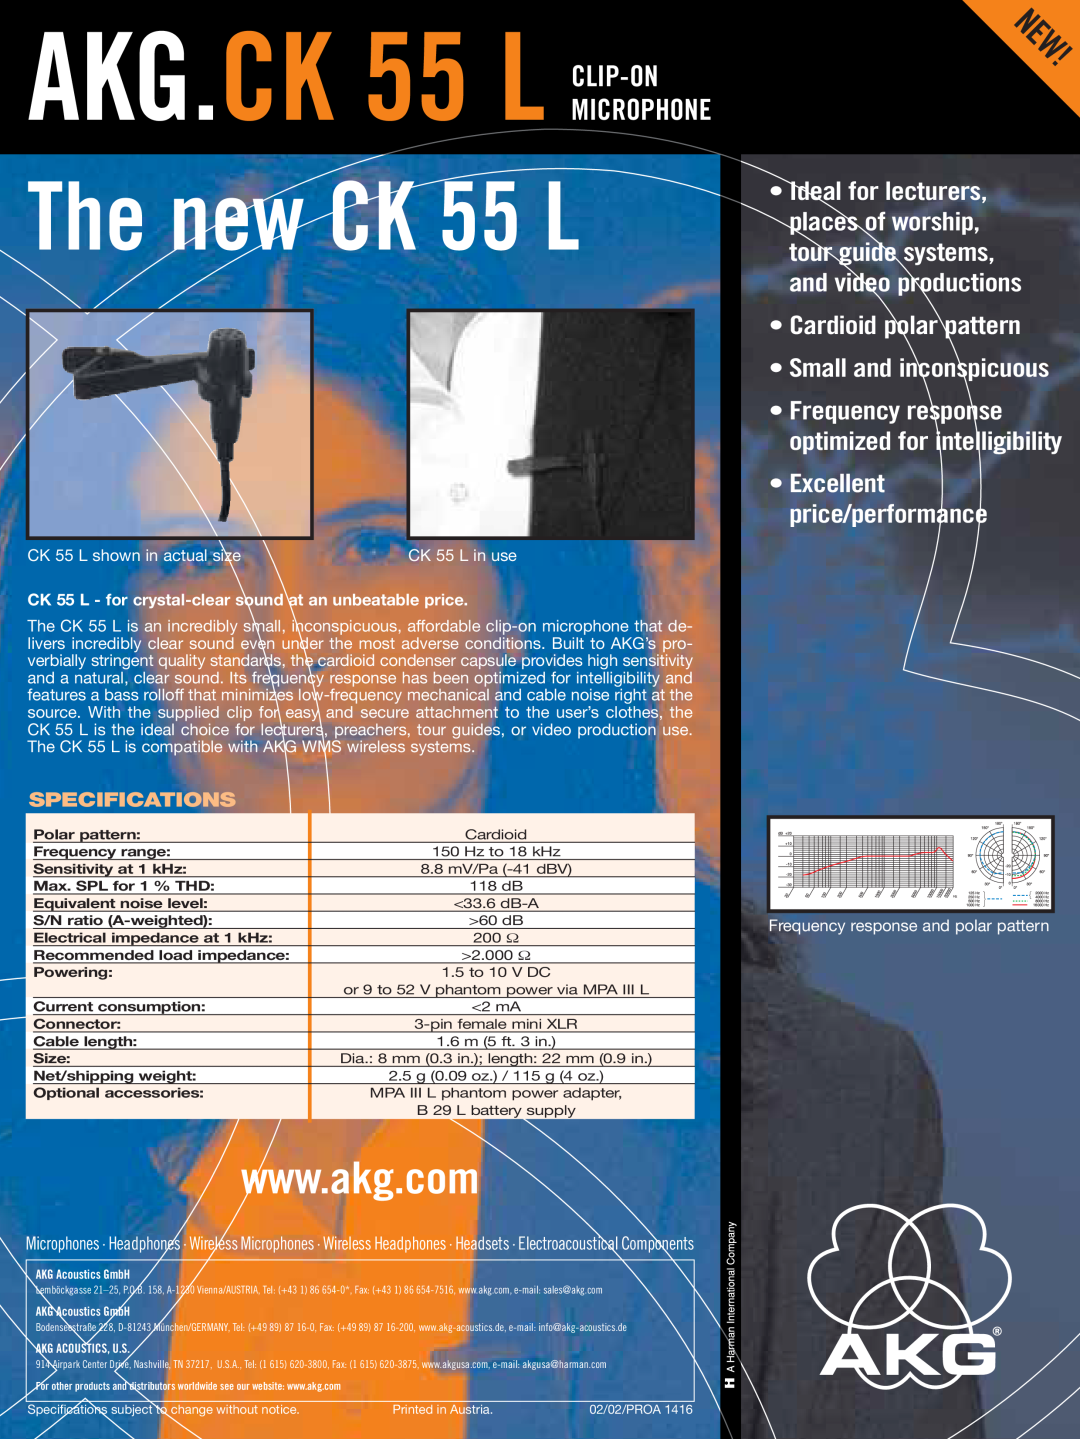 AKG Acoustics CK55L AKG.CK 55 L CLIP-ON, The new CK 55 L, Microphone, Cardioid polar pattern, Small and inconspicuous 